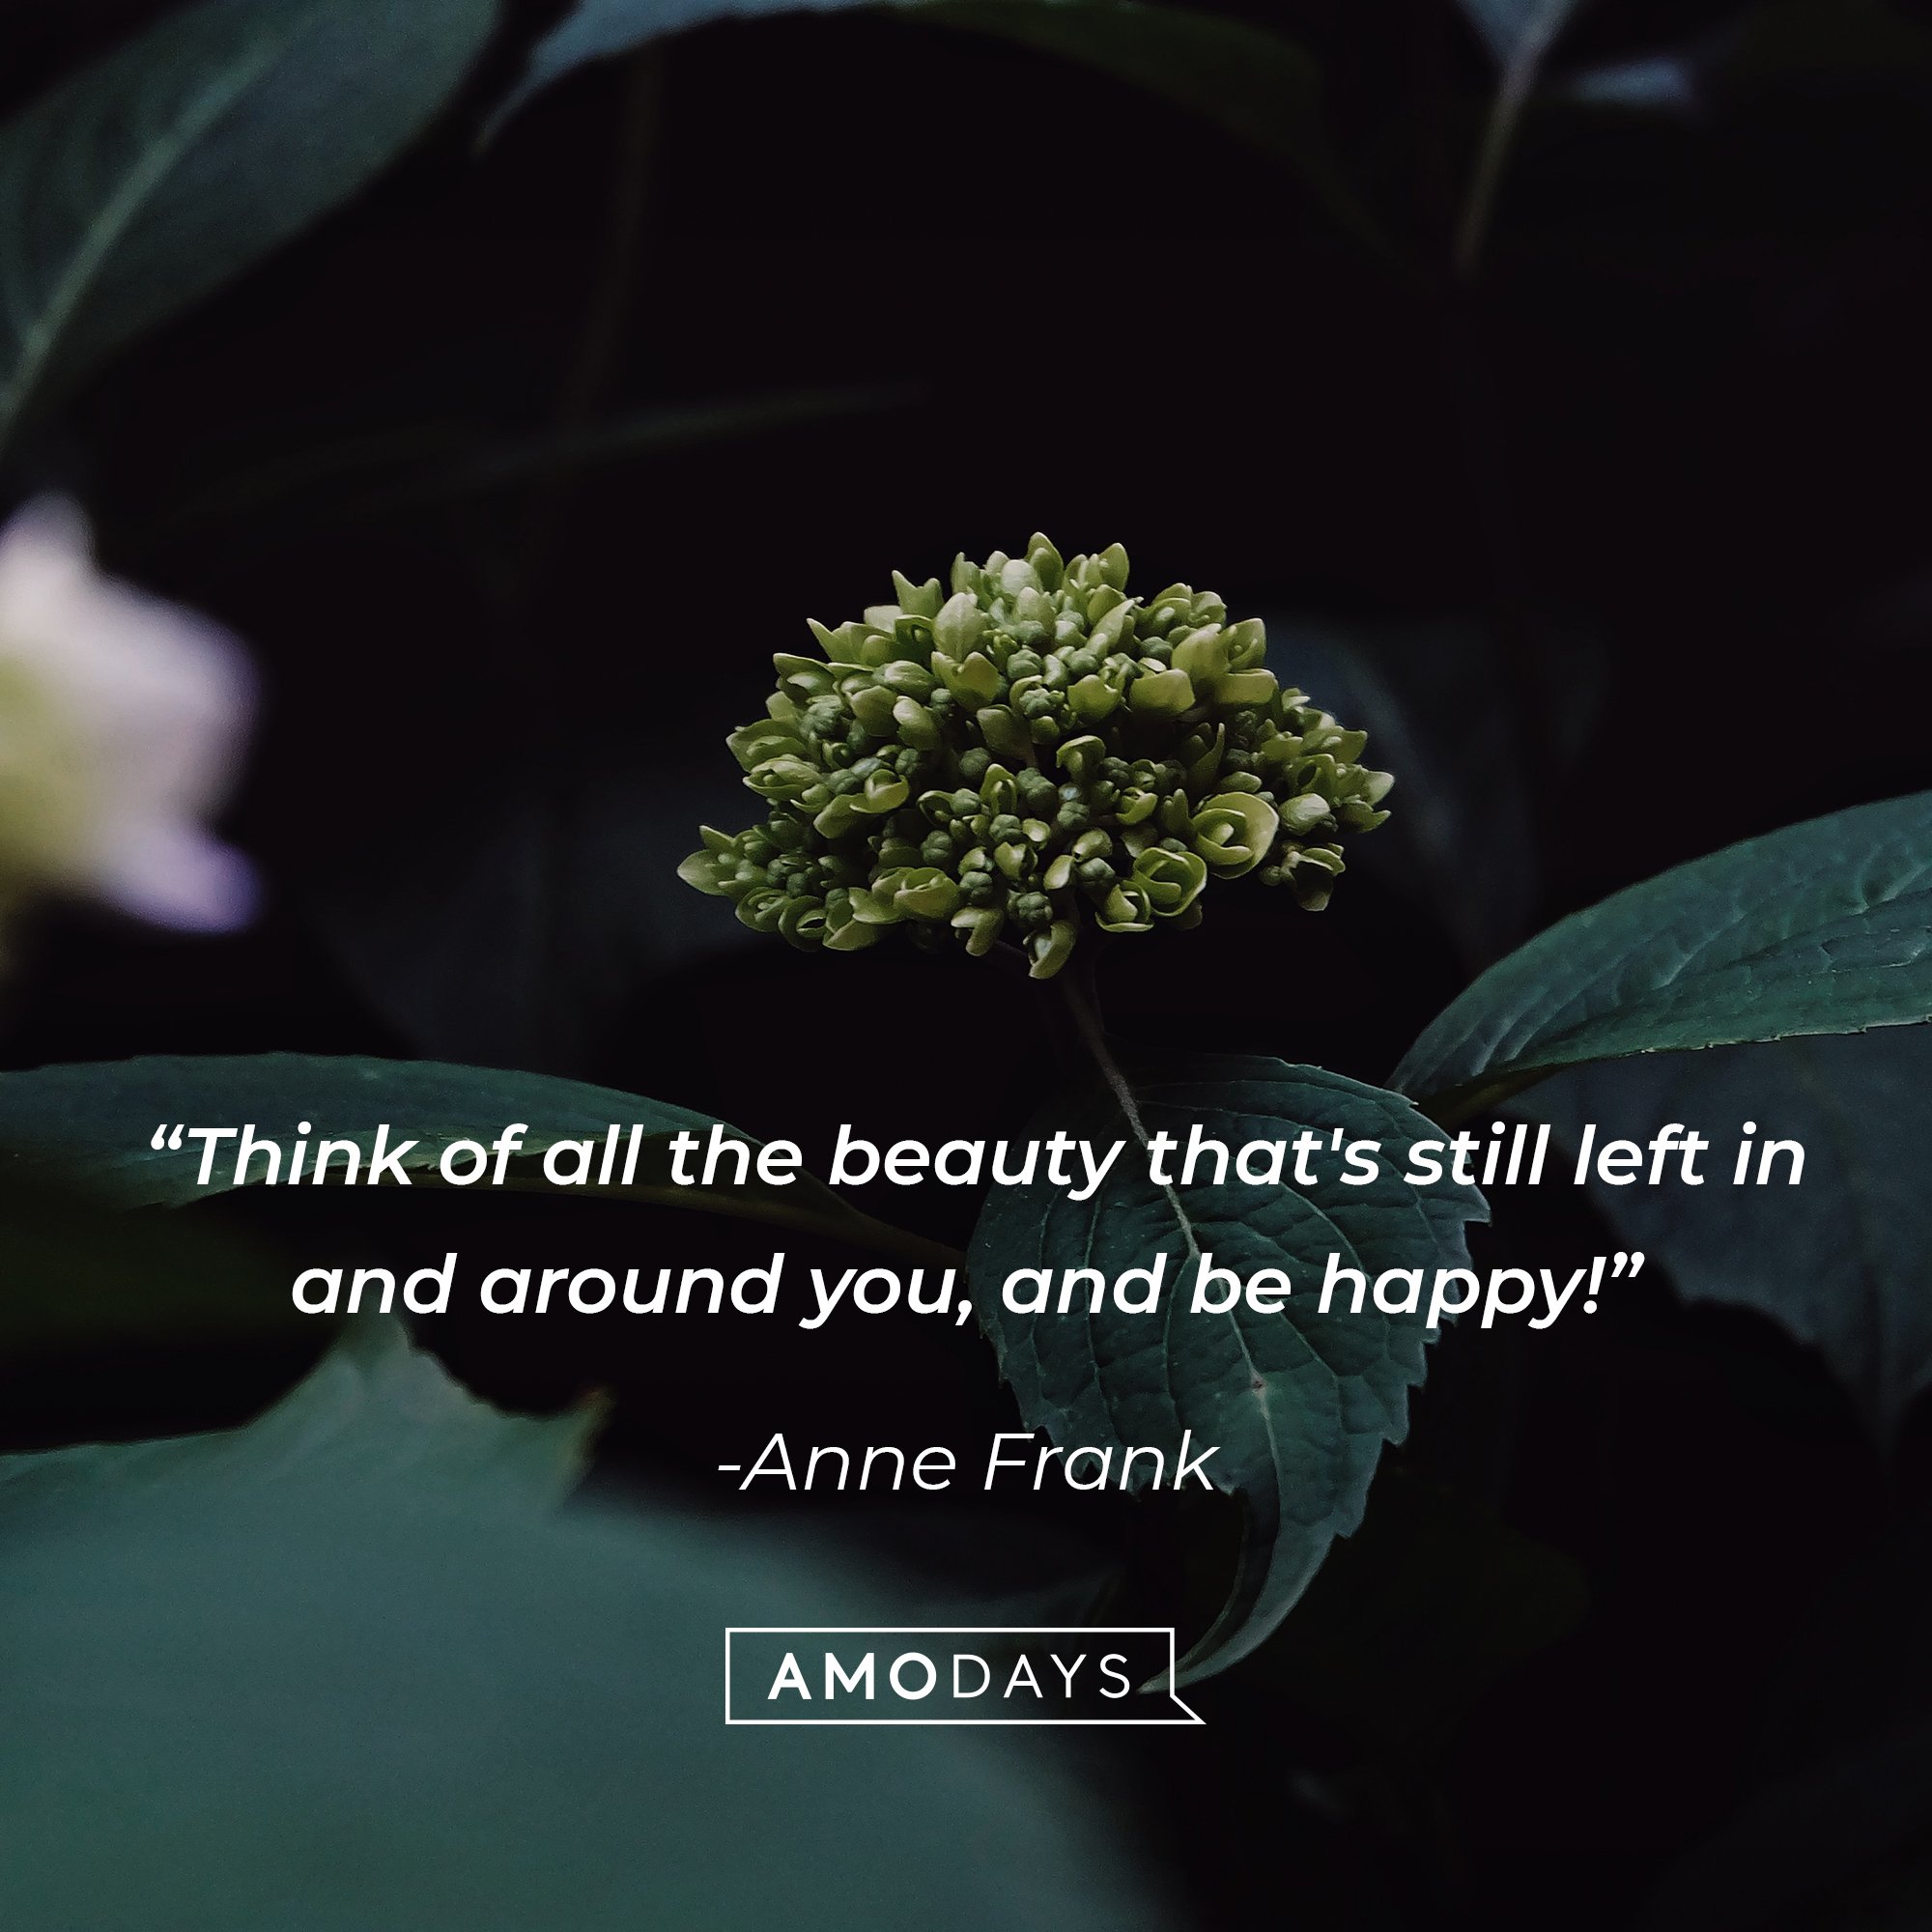 Anne Frank's quote: “Think of all the beauty that's still left in and around you, and be happy!” | Image: AmoDays